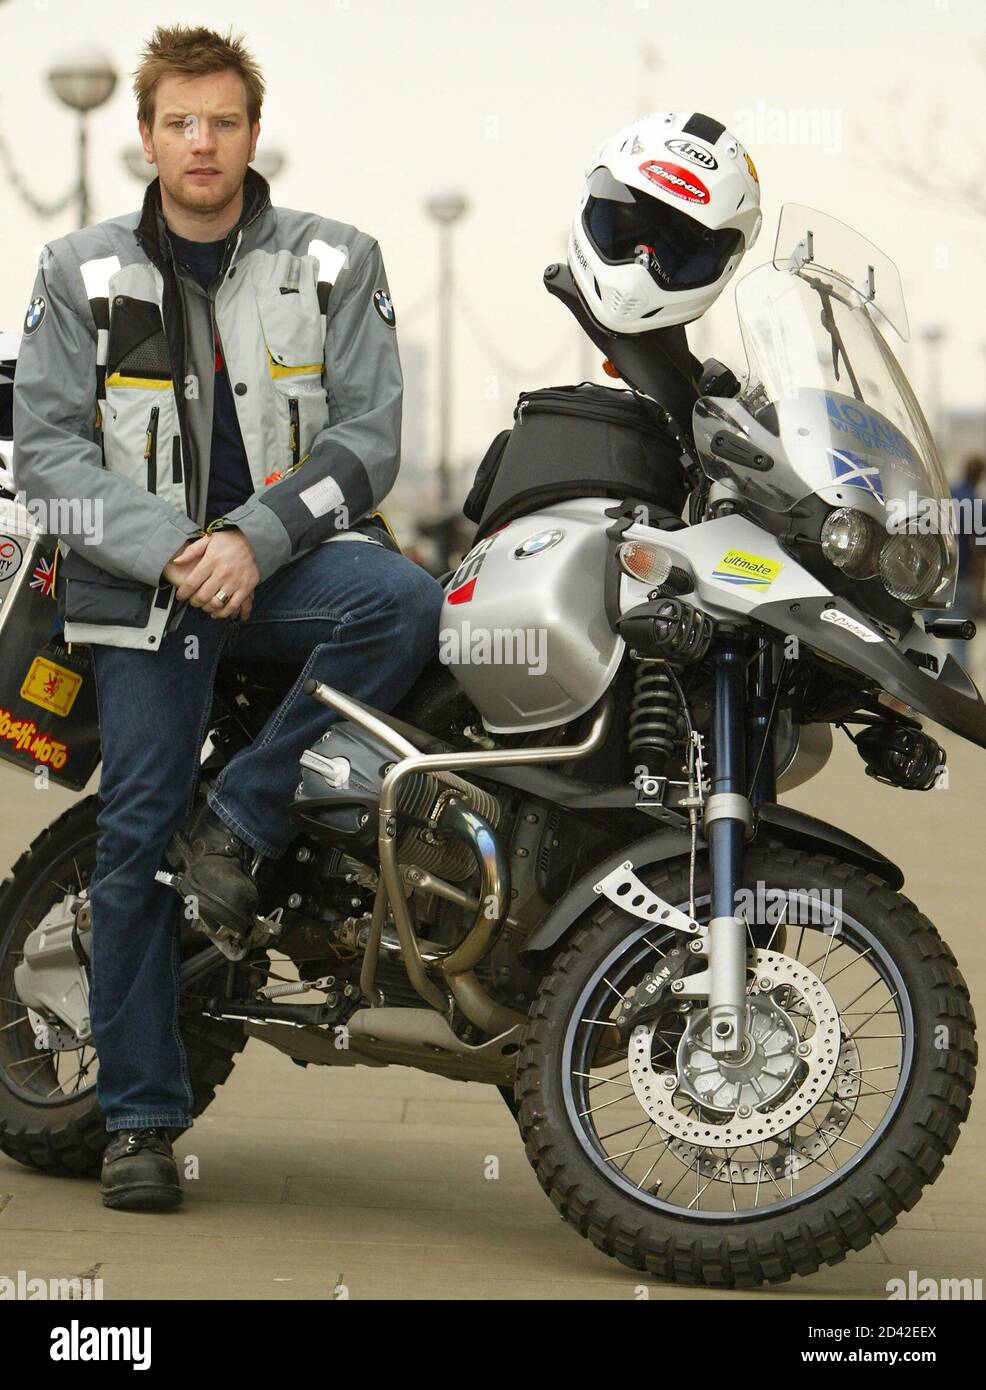 British actor Ewan McGregor launches his 20,000 mile London to New York  motorcycle journey in London, April 13, 2004. McGregor and fellow actor  Charley Boorman, who start their journey later this month,